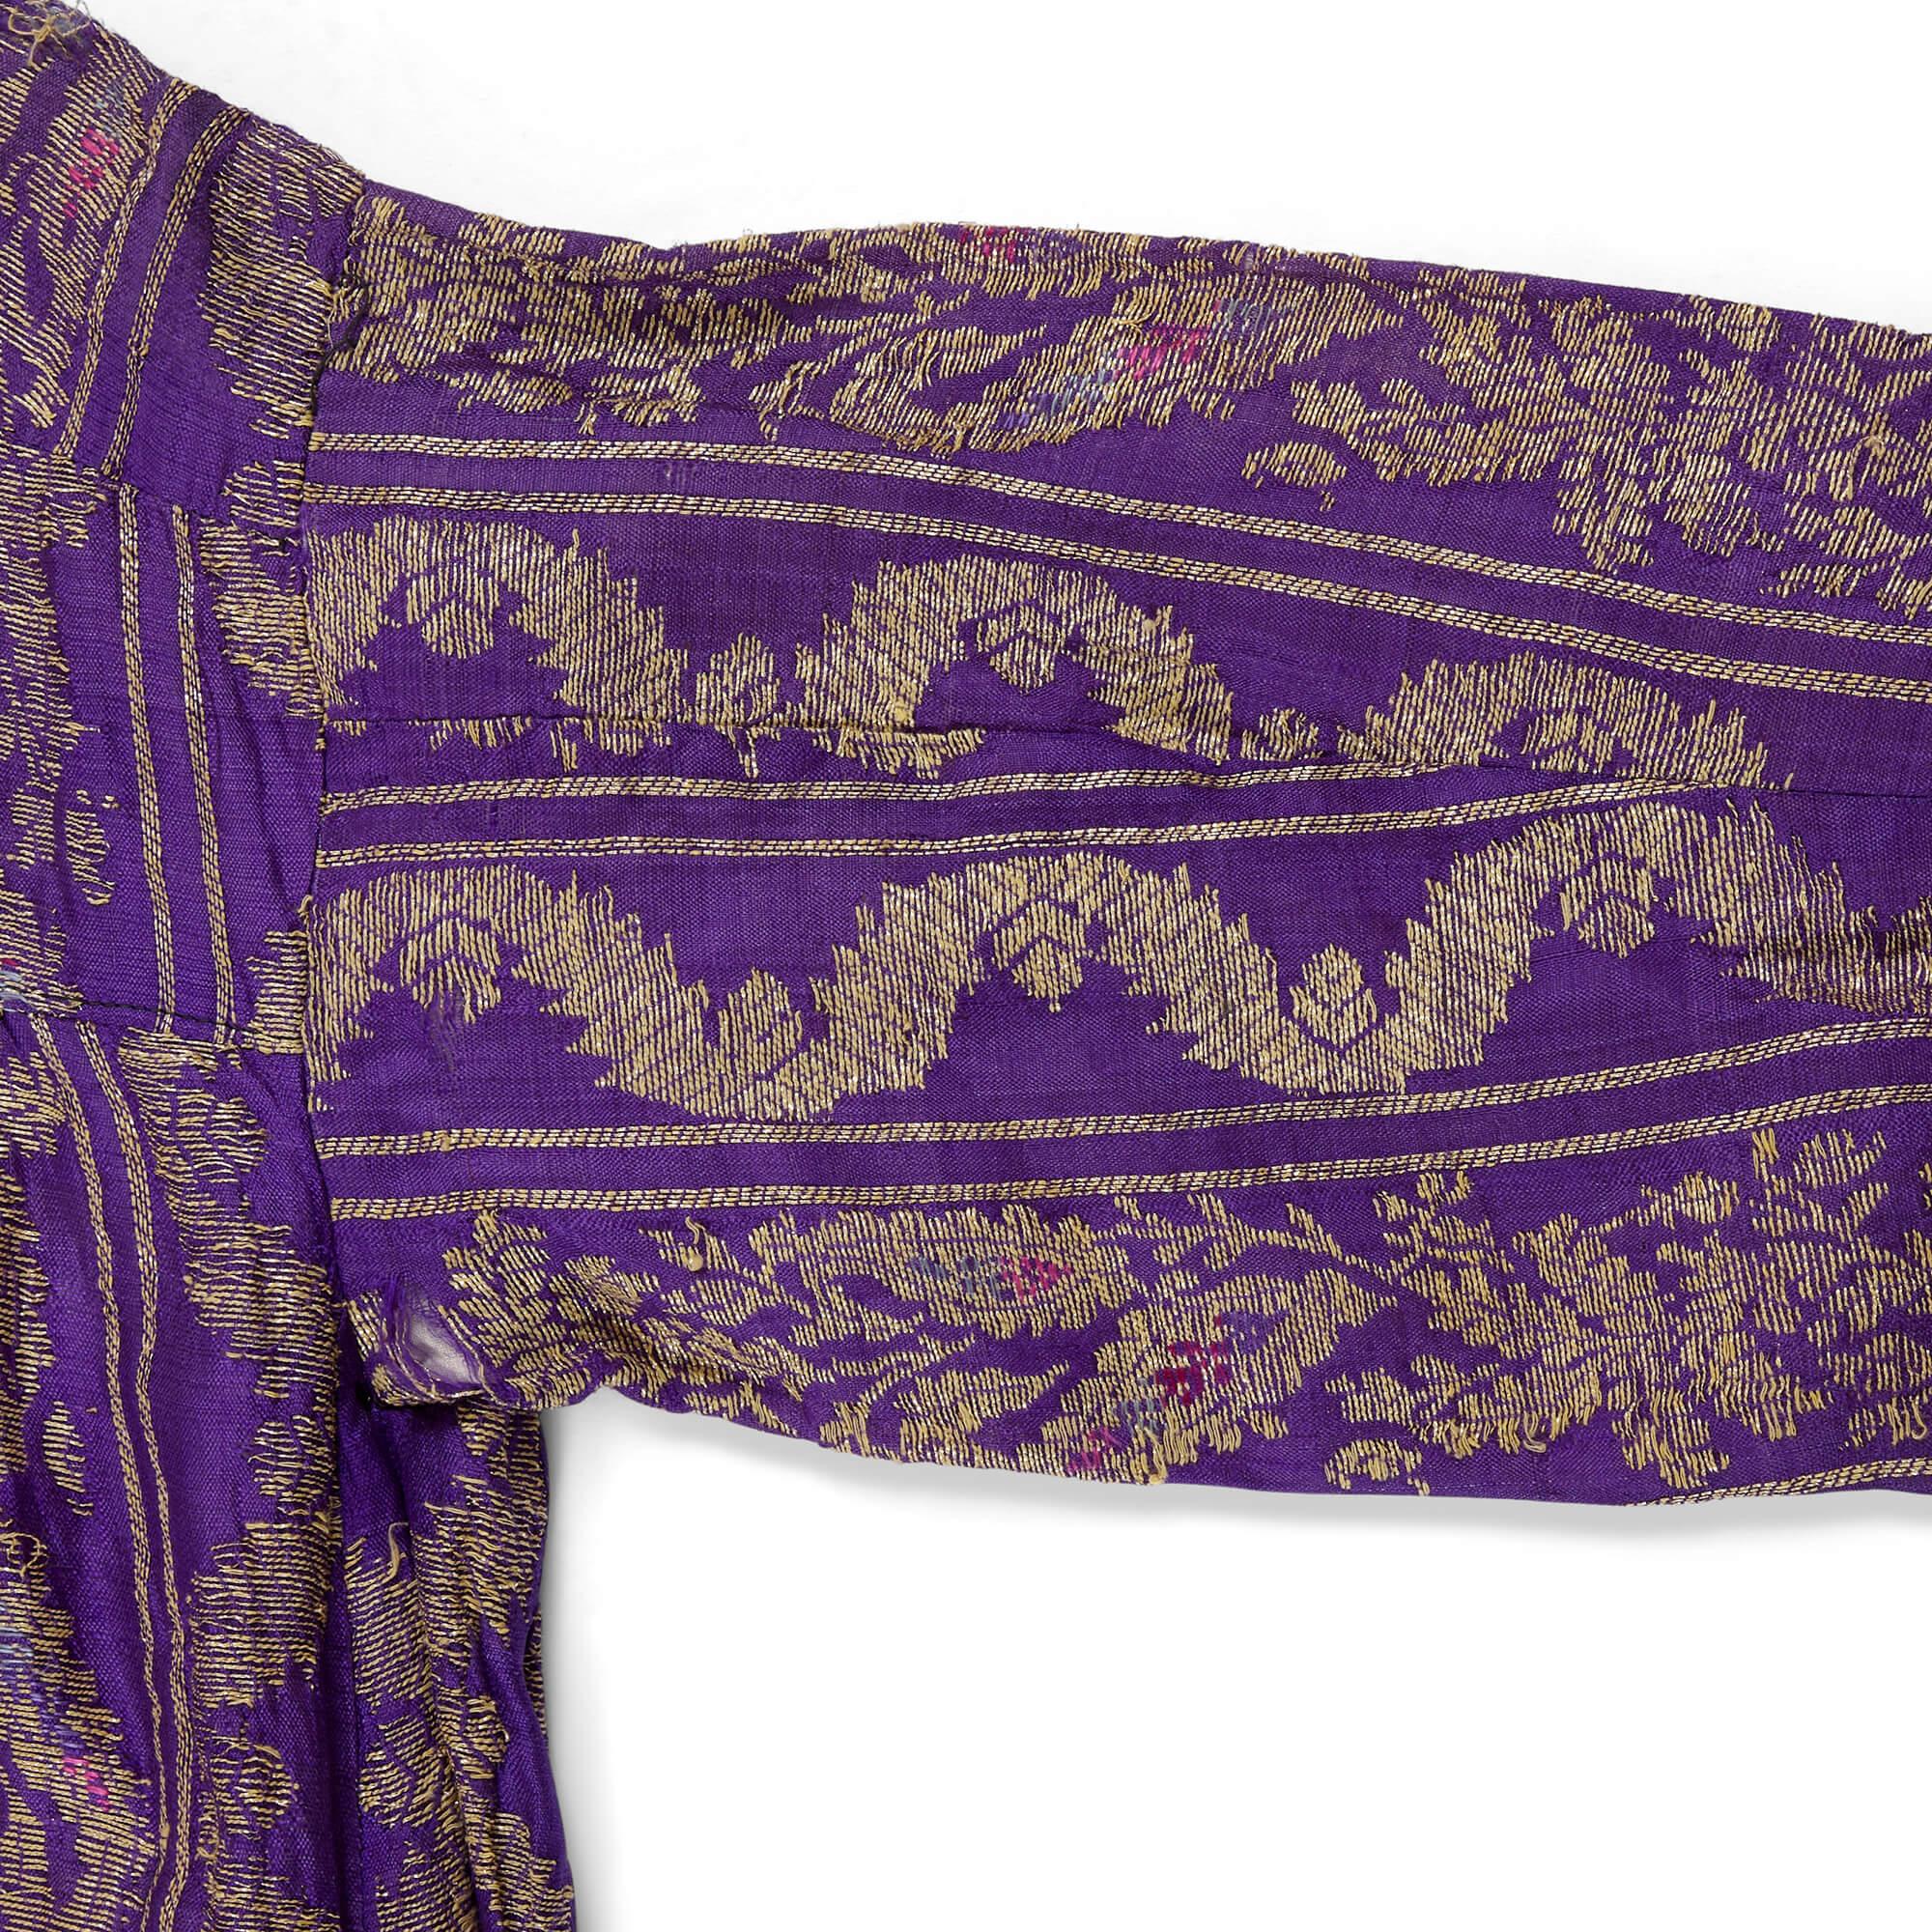 19th Century Turkish Ottoman Period Embroidered Caftan For Sale 1